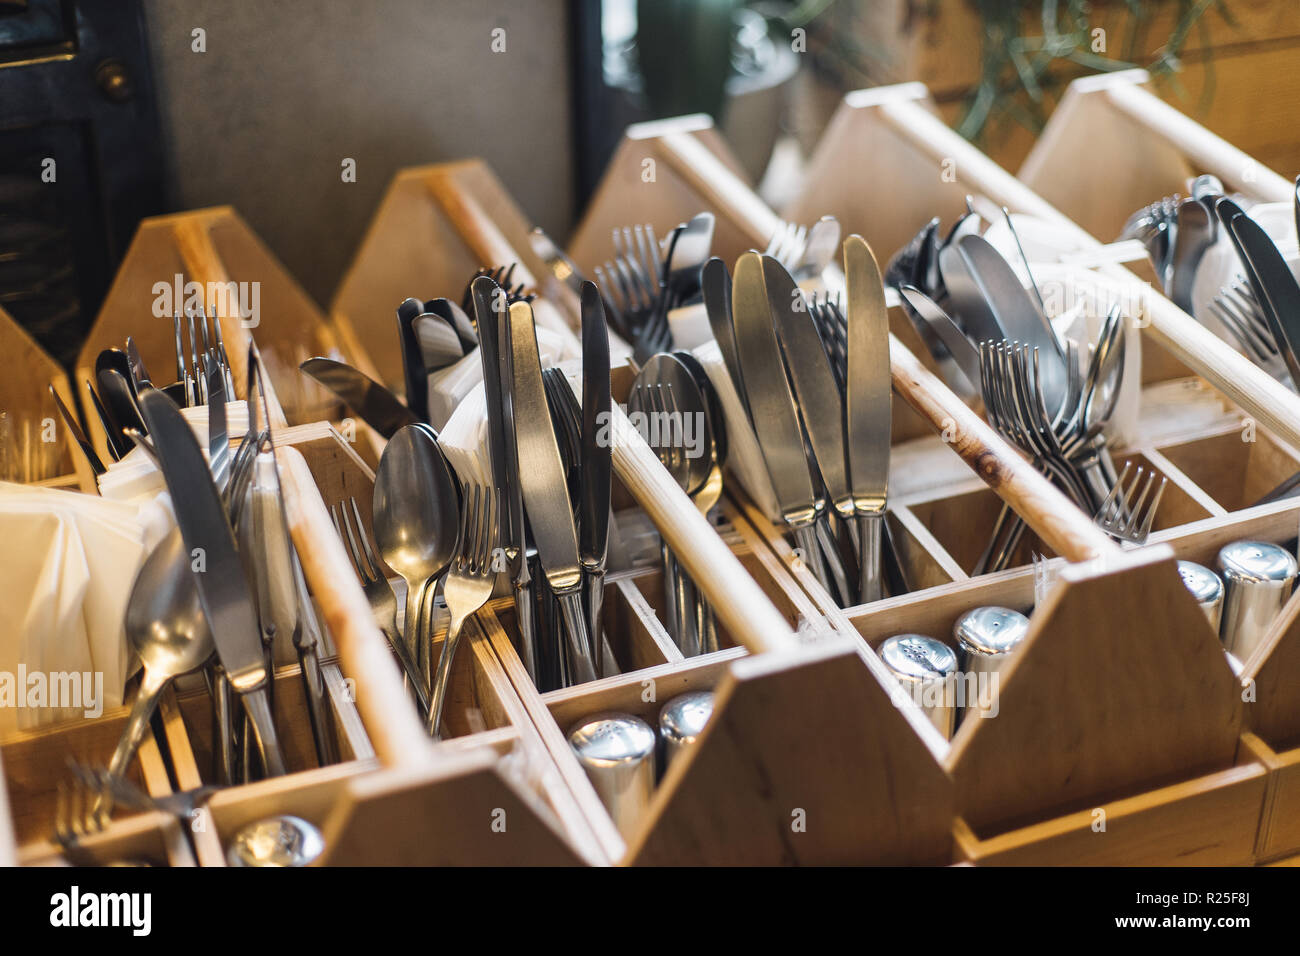 Forks, knifes and spoons in restaurants interior. Kitchenwear in close up, ready to service. Stock Photo